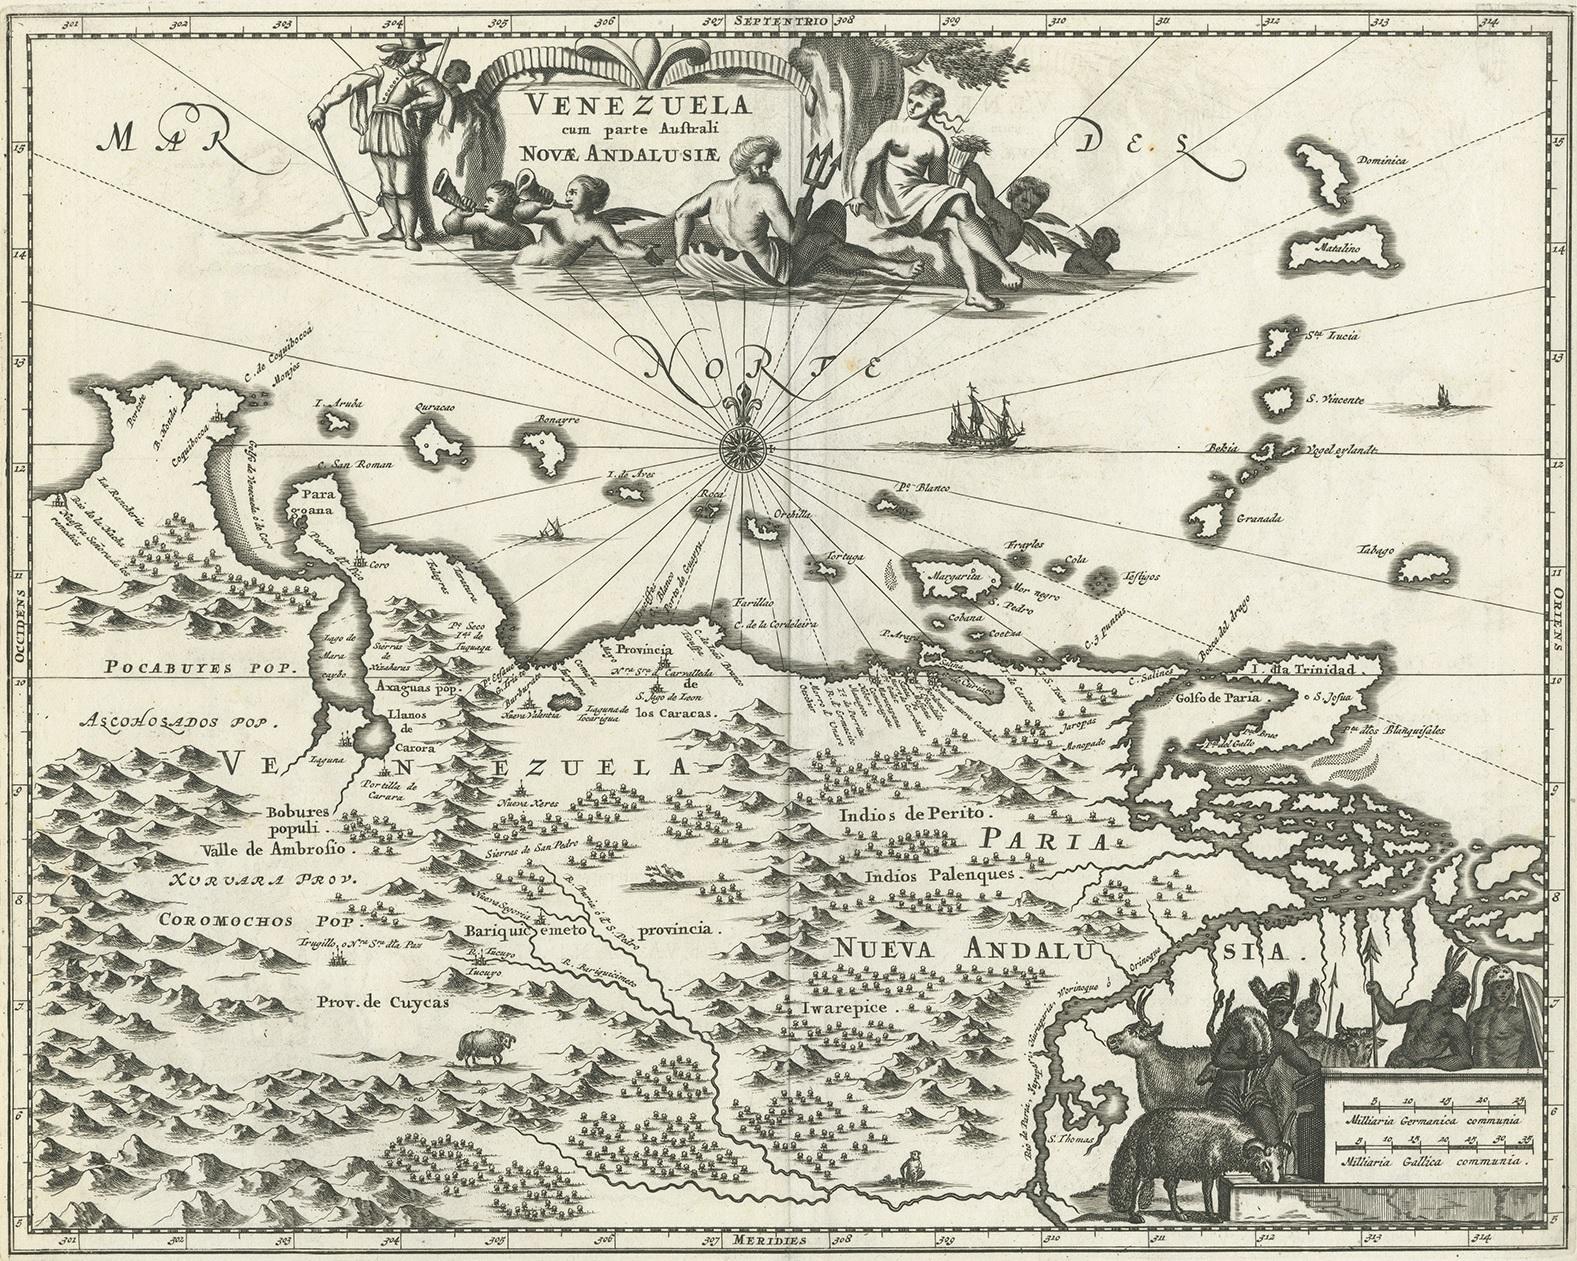 Antique map titled 'Venezuela cum parte Australi Novae Andalusiae'. The map extends from Coquibocoa to the Orinoque River, centered on Bariquicemento and Cape de Curiacao. Large cartouche, compass rose and sailing ships and vignettes of animals in